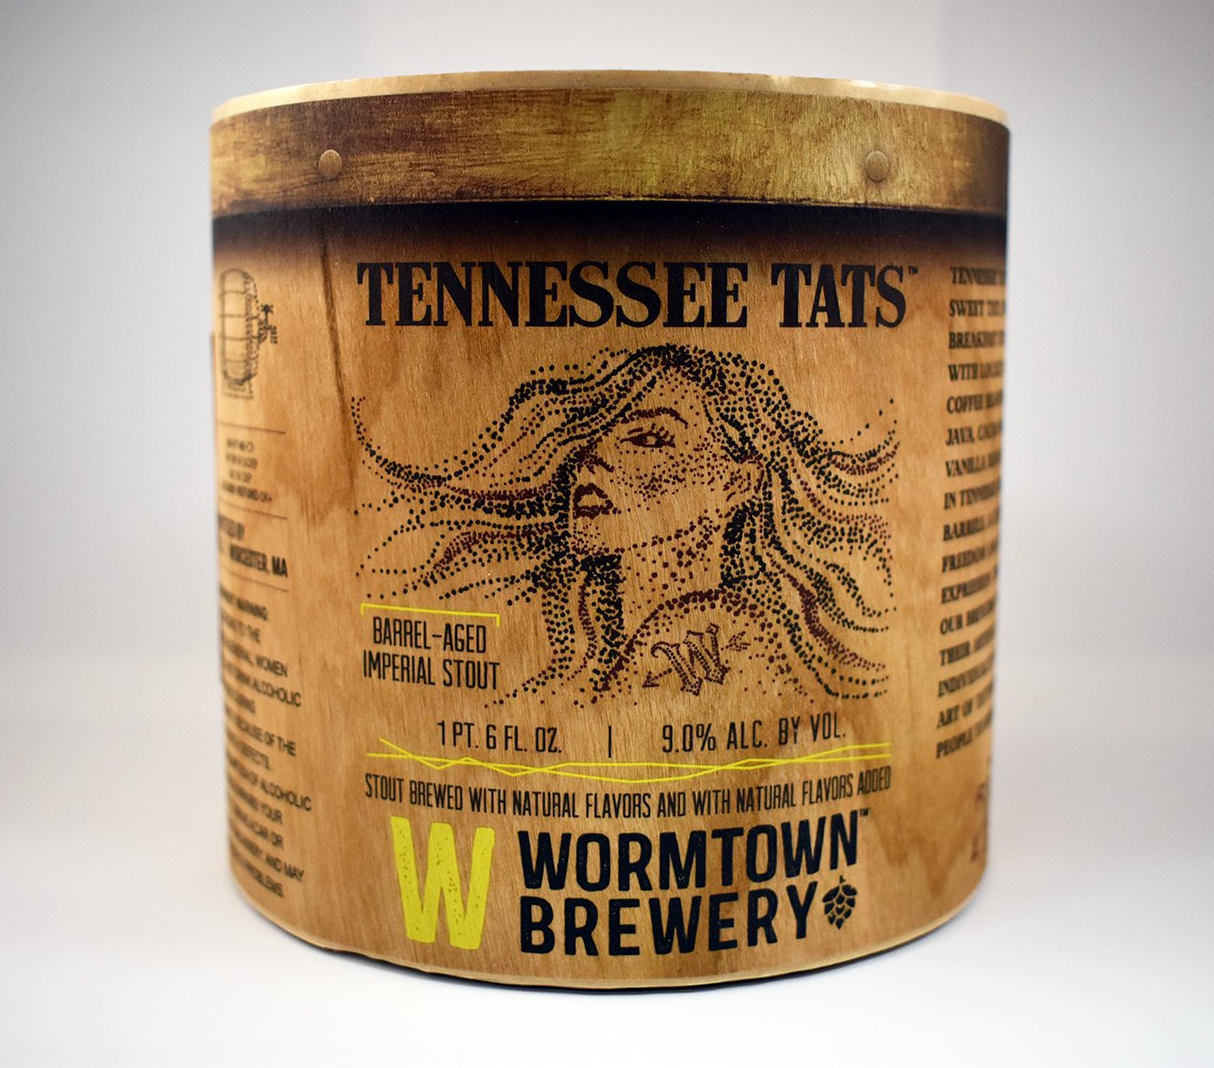 Wormtown Tennessee Tats Labels